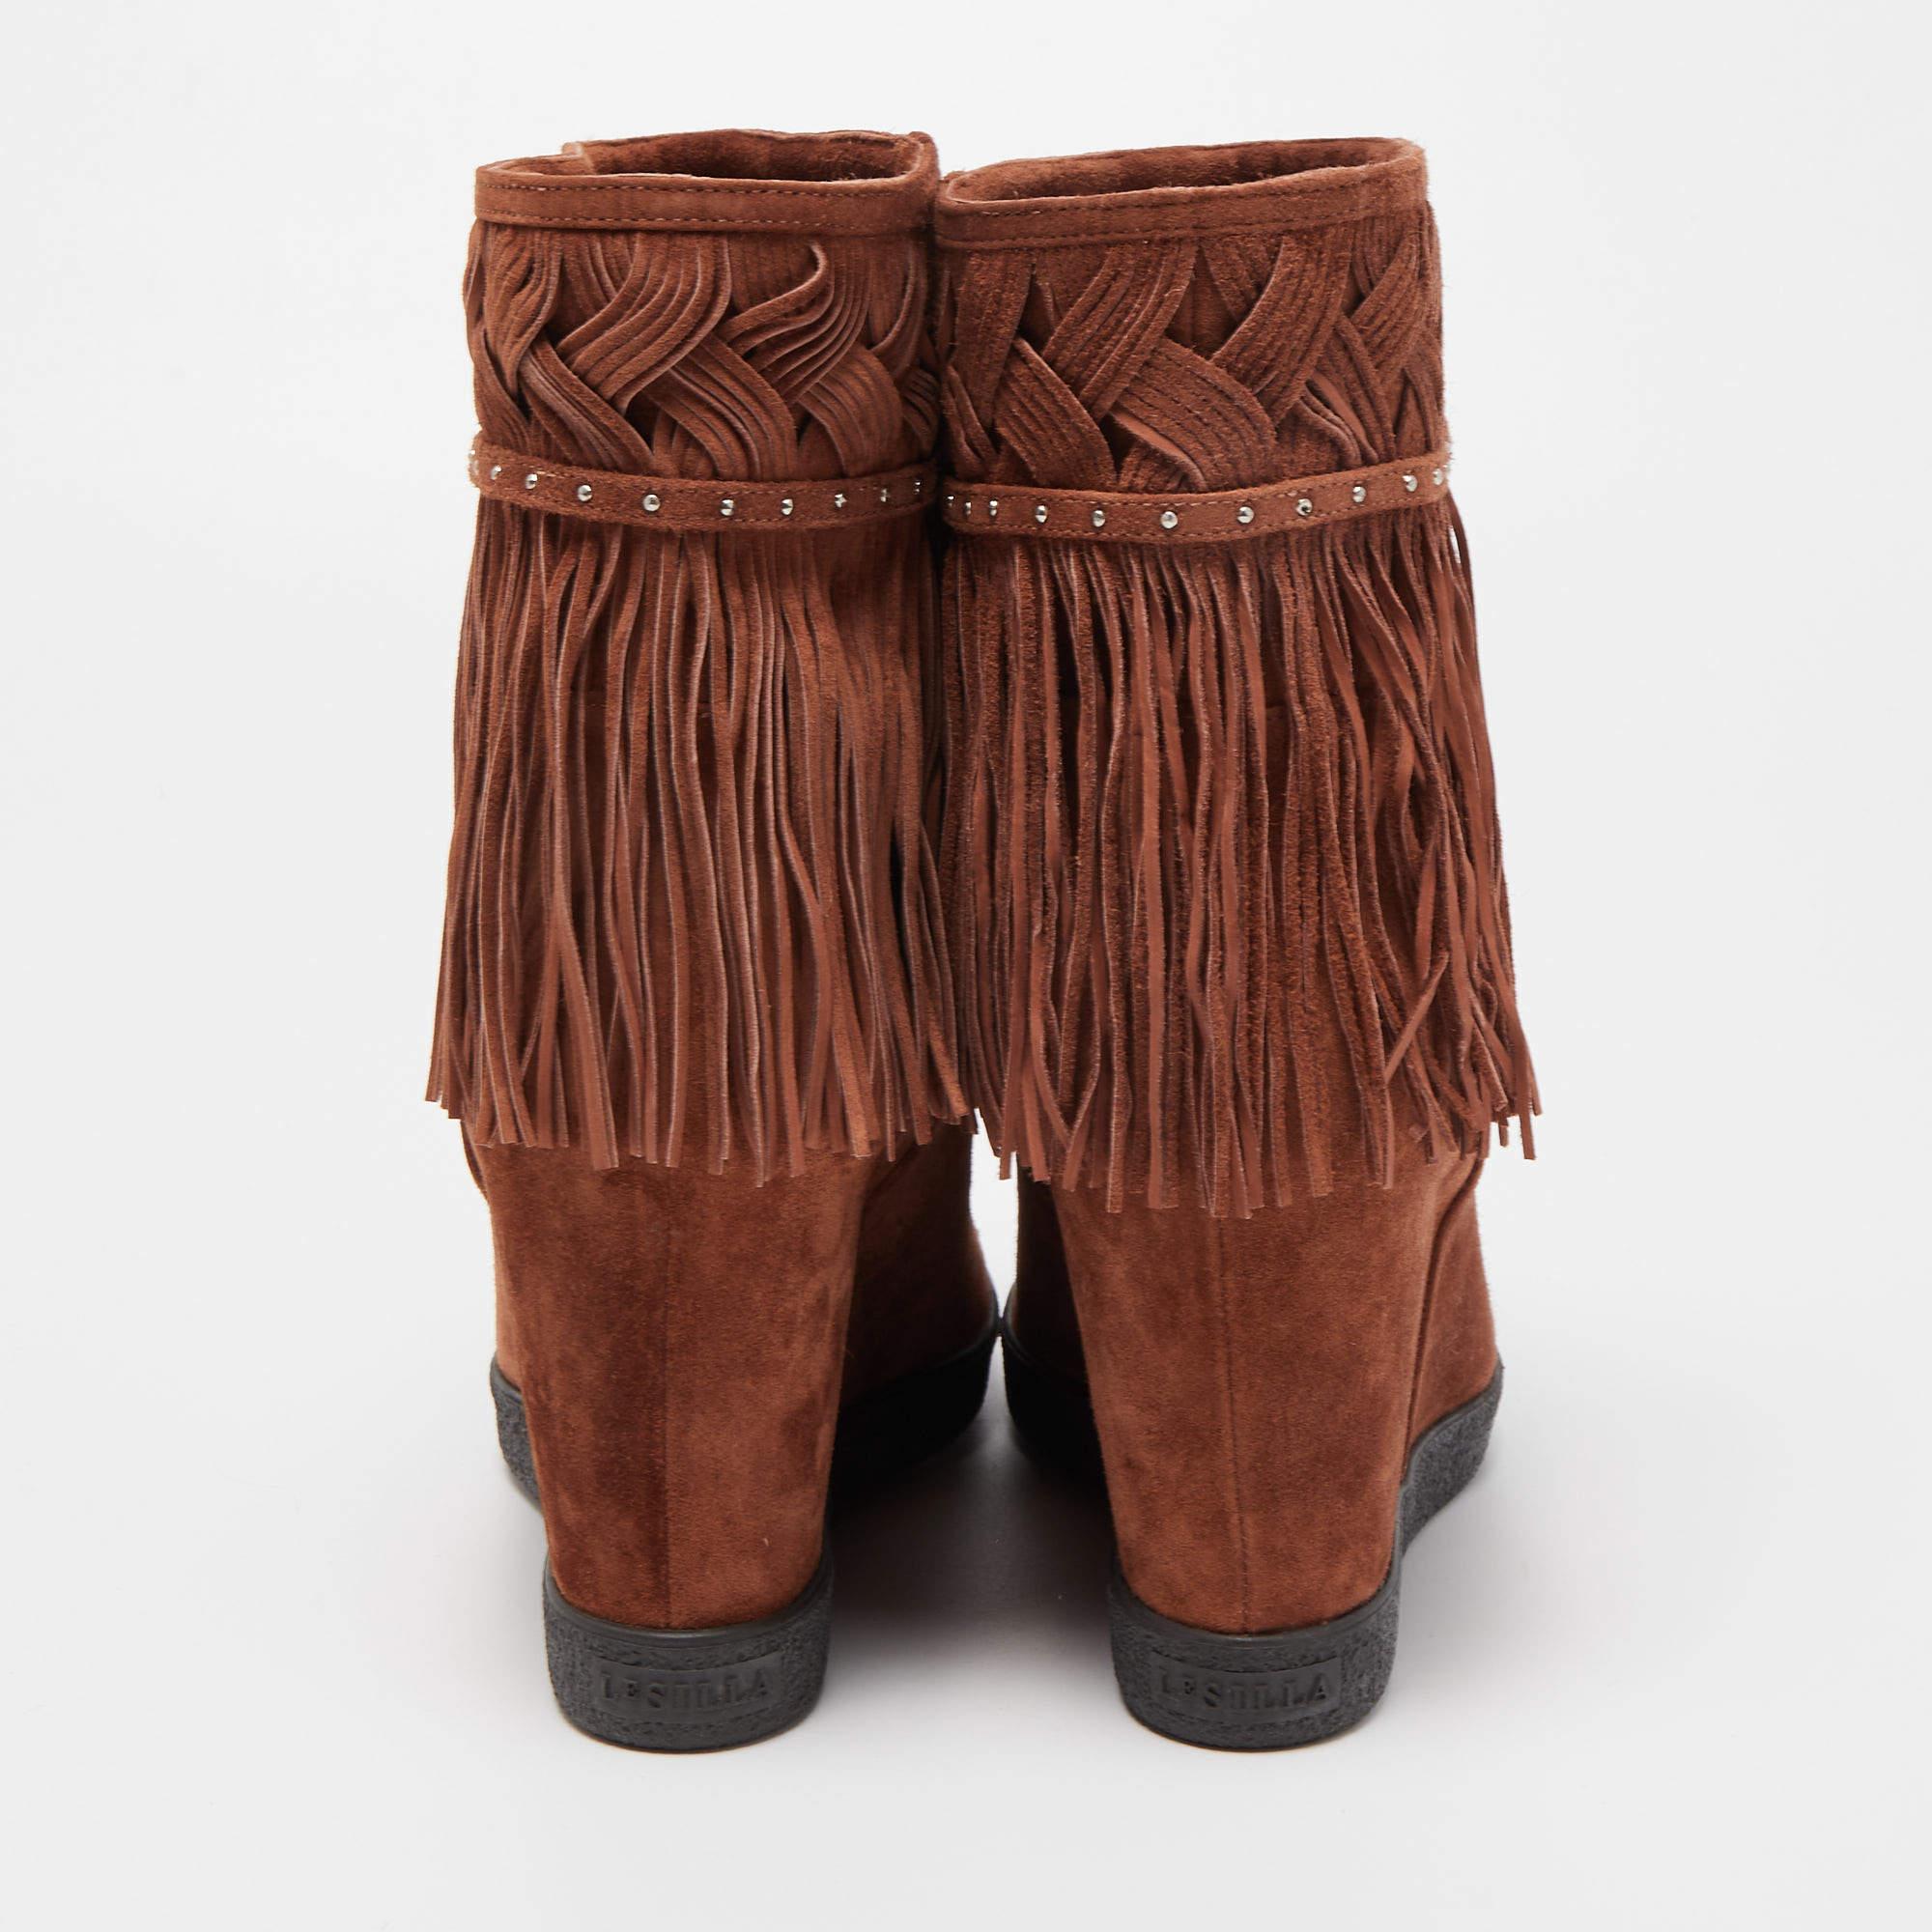 Le Silla Brown Suede Fringe Ankle Boots Size 38 3